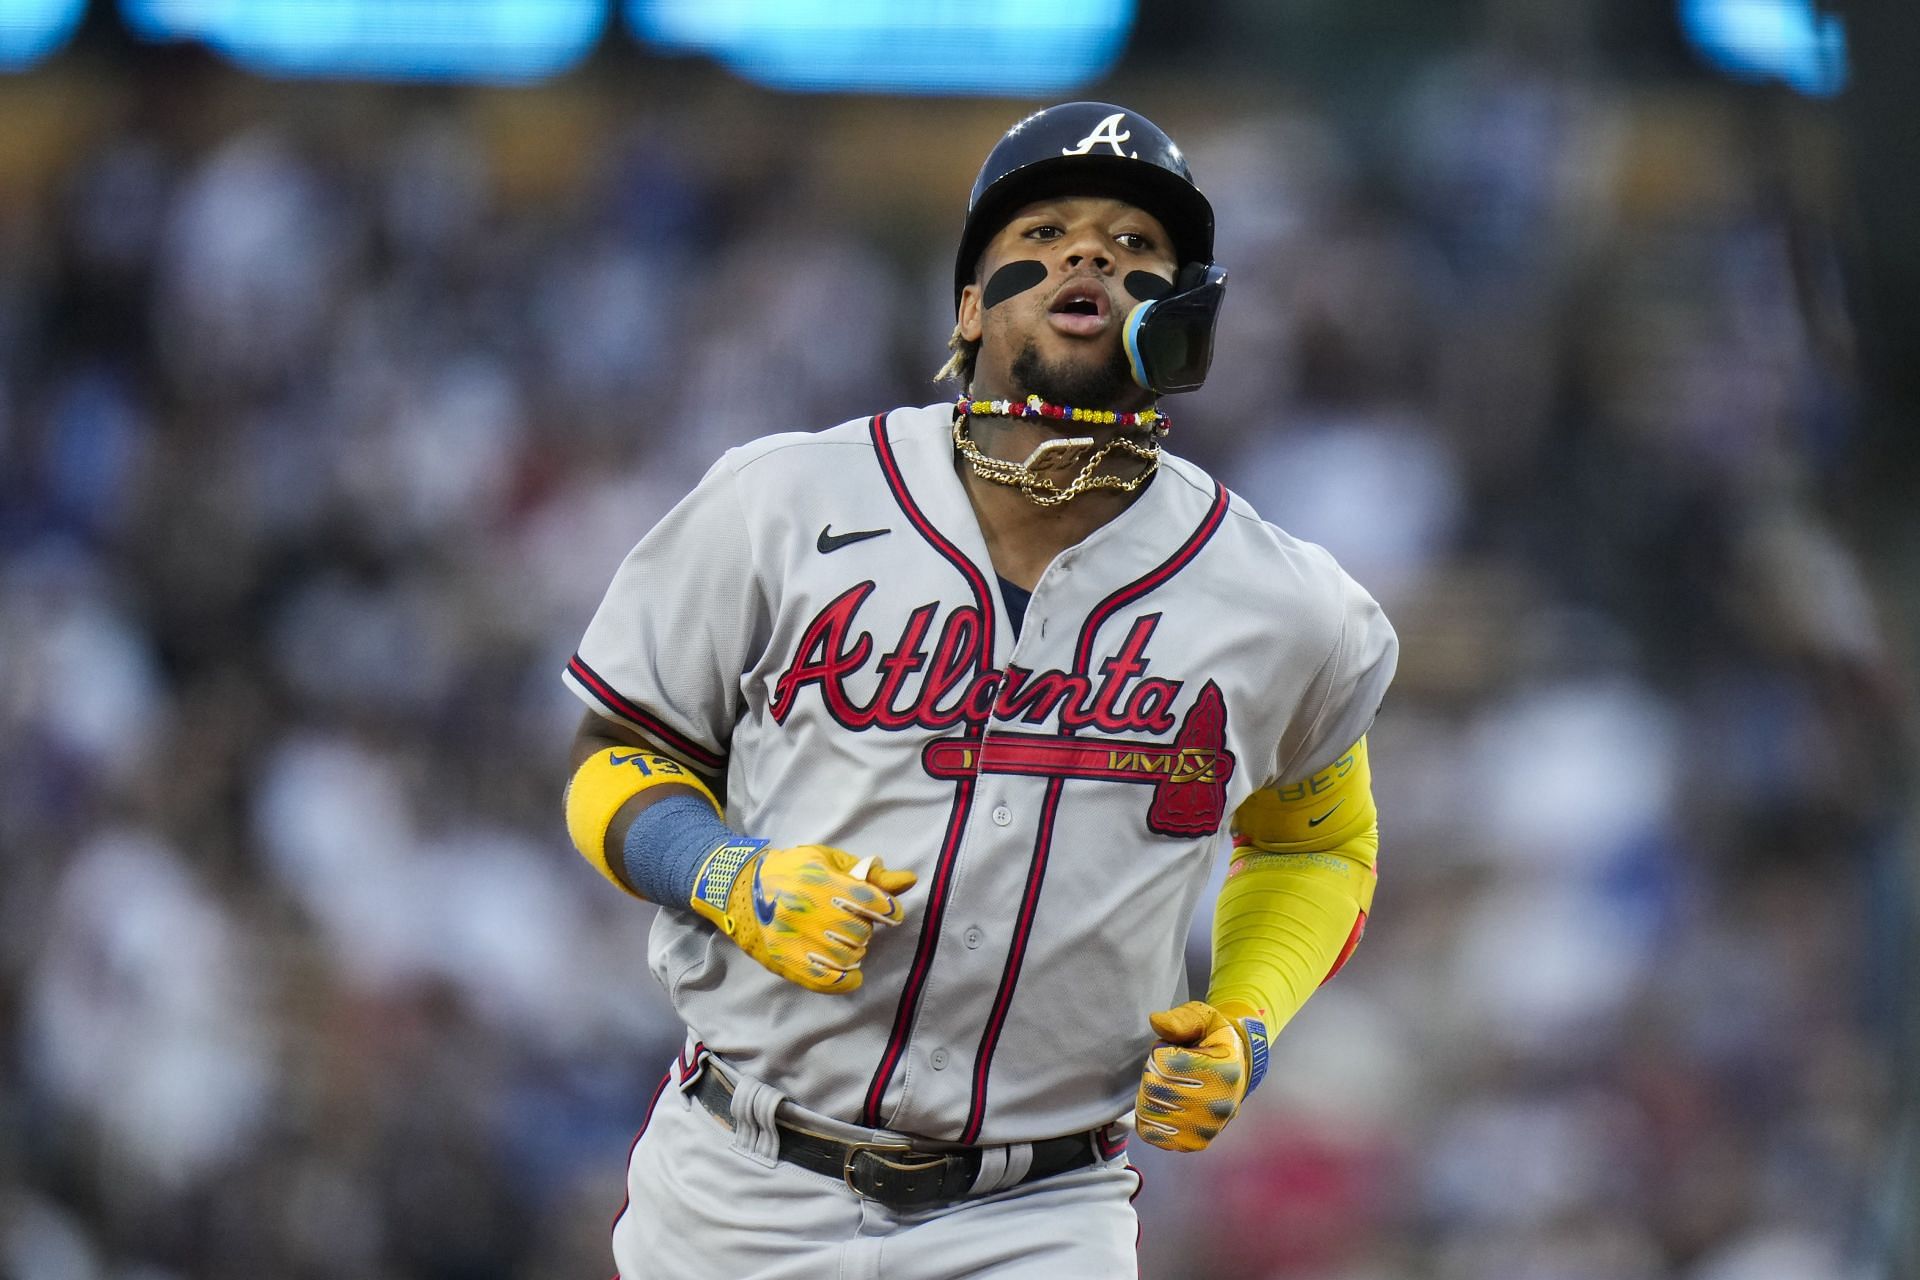 Ronald Acuna Jr. Returning and Still in Hunt for NL MVP, HR Crown